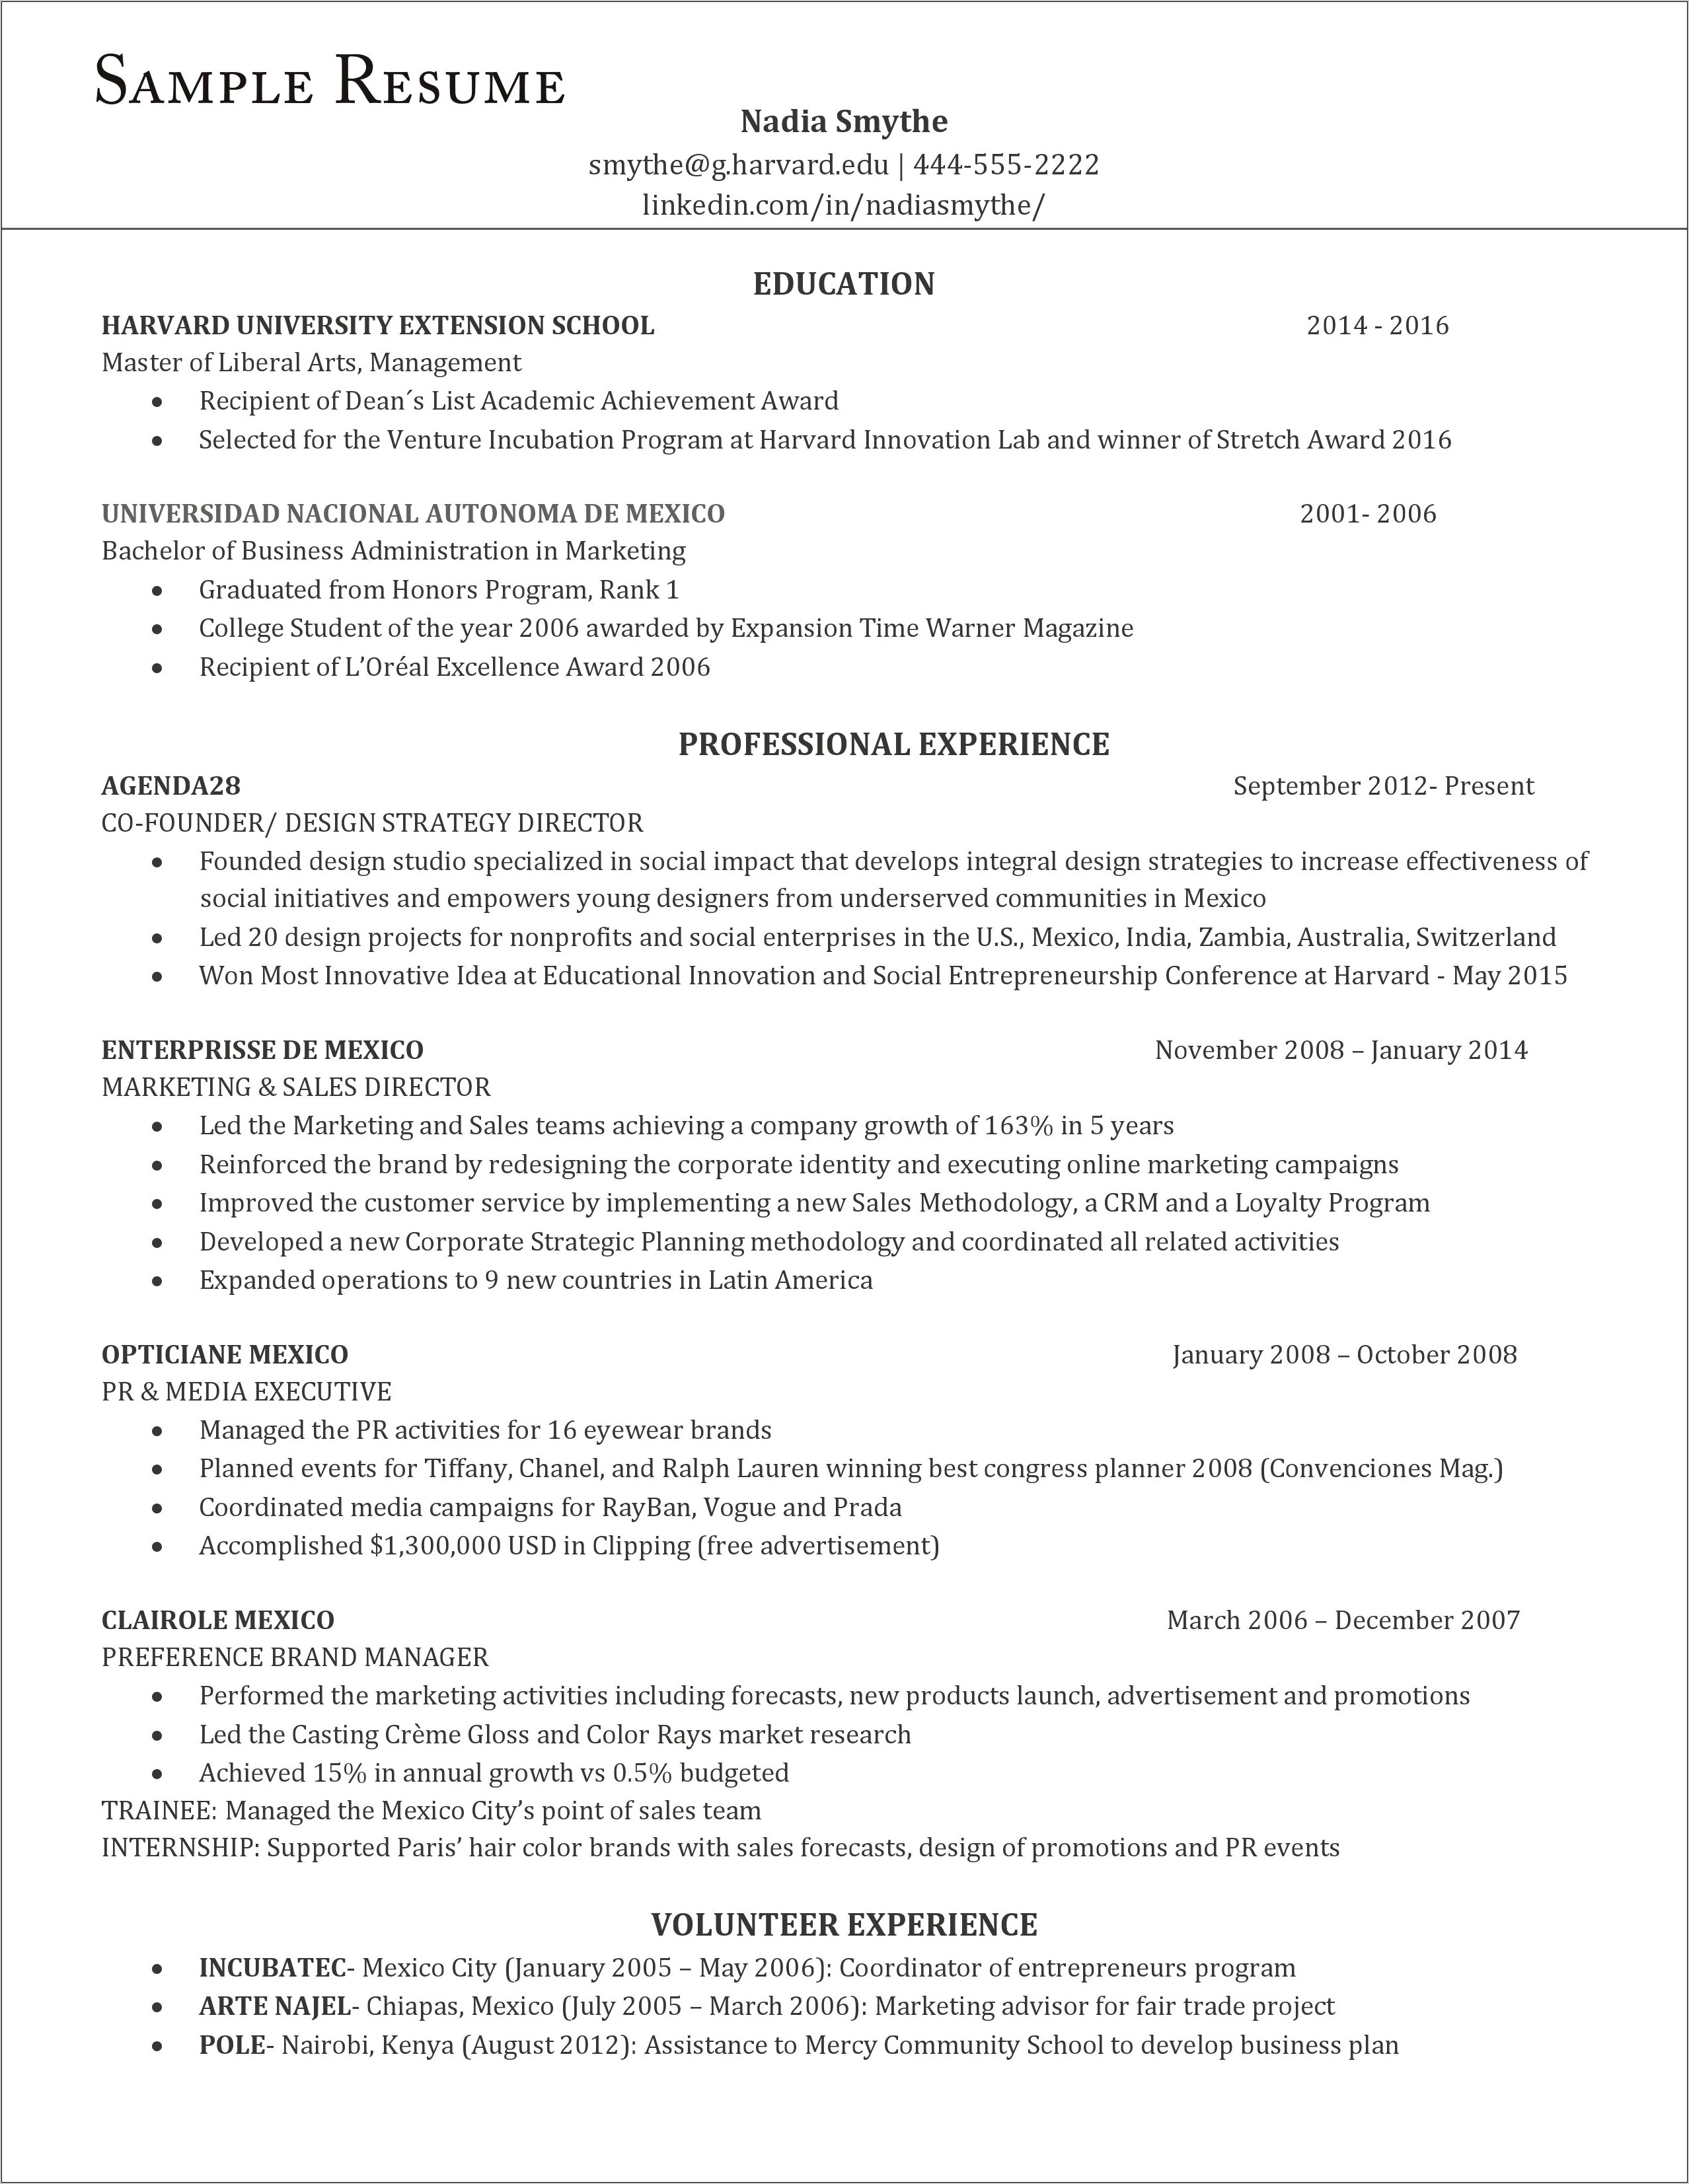 Best Formats For Resumes 2015